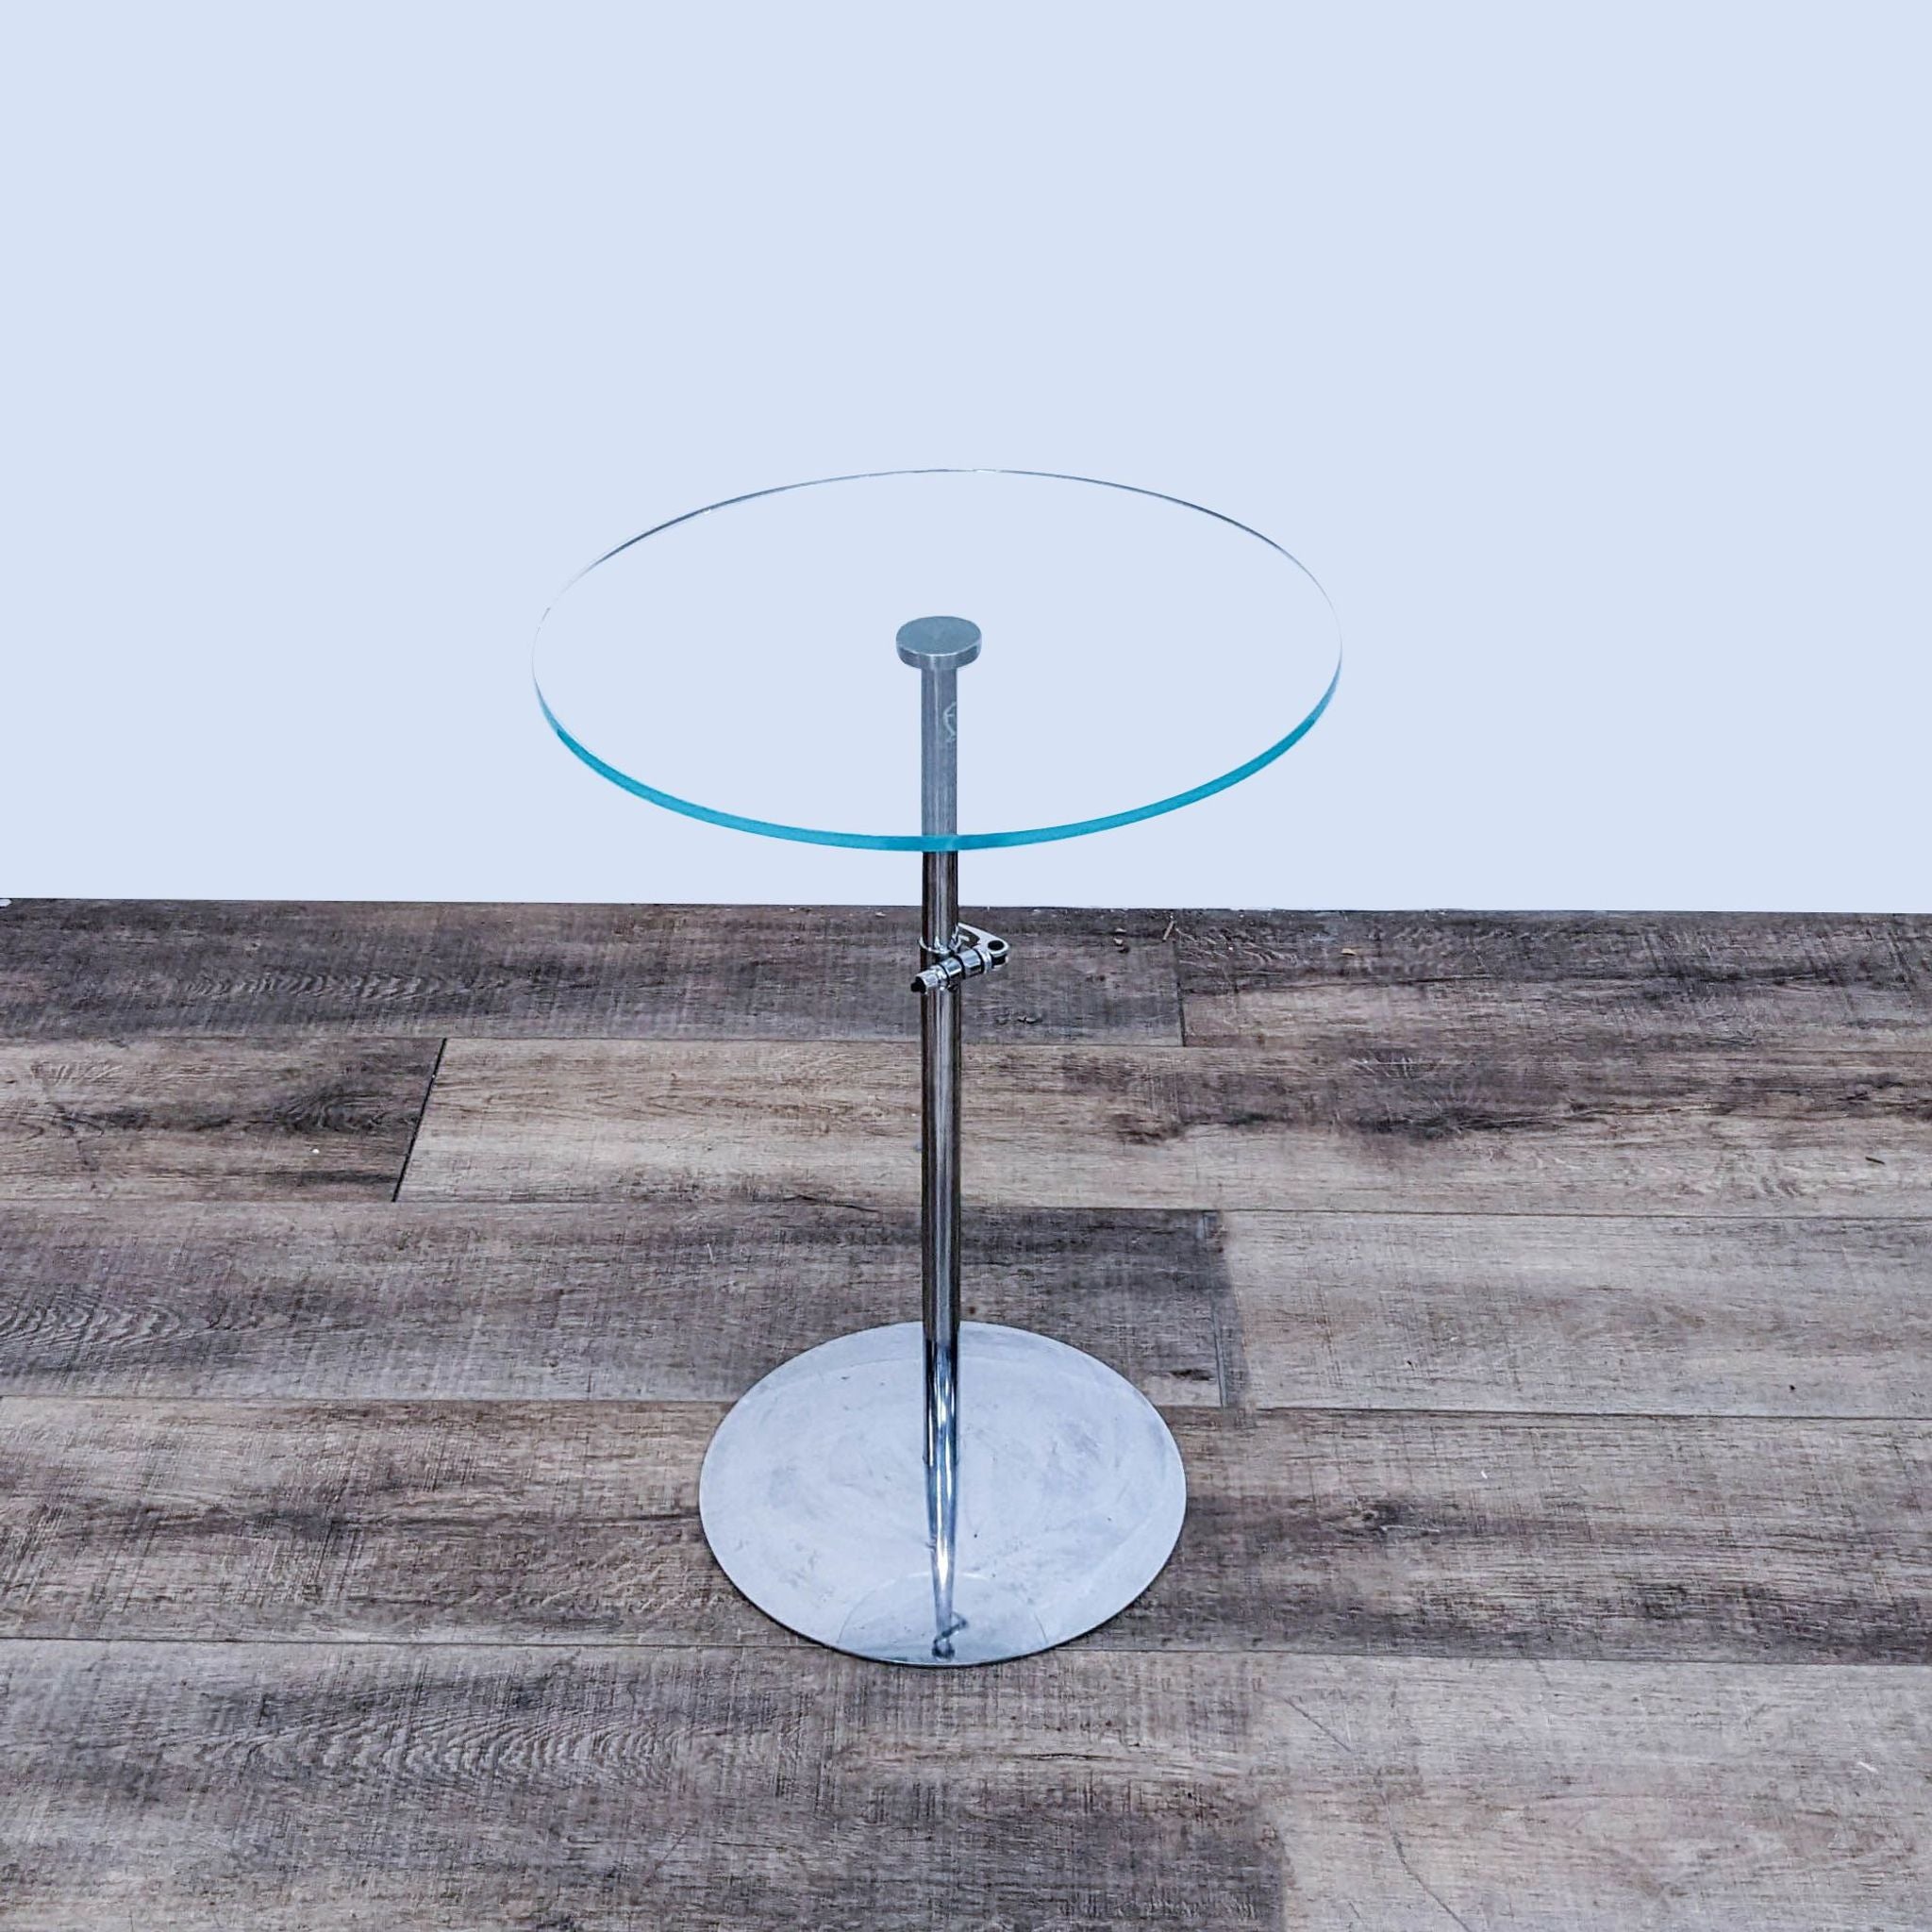 Elevated view of a Crate & Barrel round glass-topped side table with sleek chrome stand, showcasing brand label.